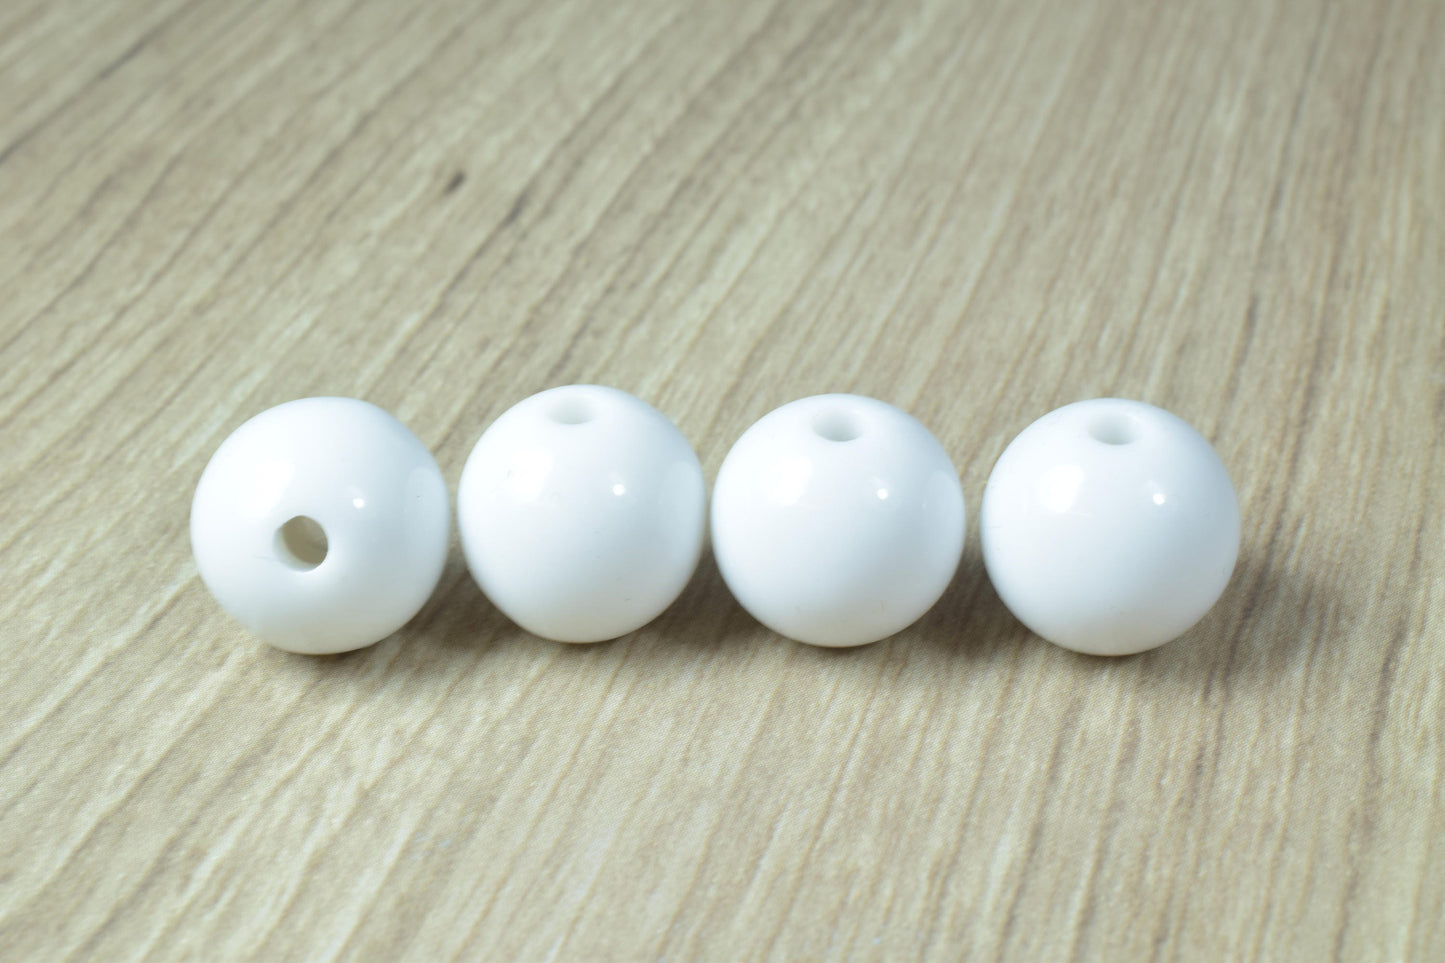 14mm White Smooth Plastic Gumball Beads, 14mm Large Smooth, Acrylic Round Ball Beads,White,Large Chunky Acrylic Beads, Smooth Bead